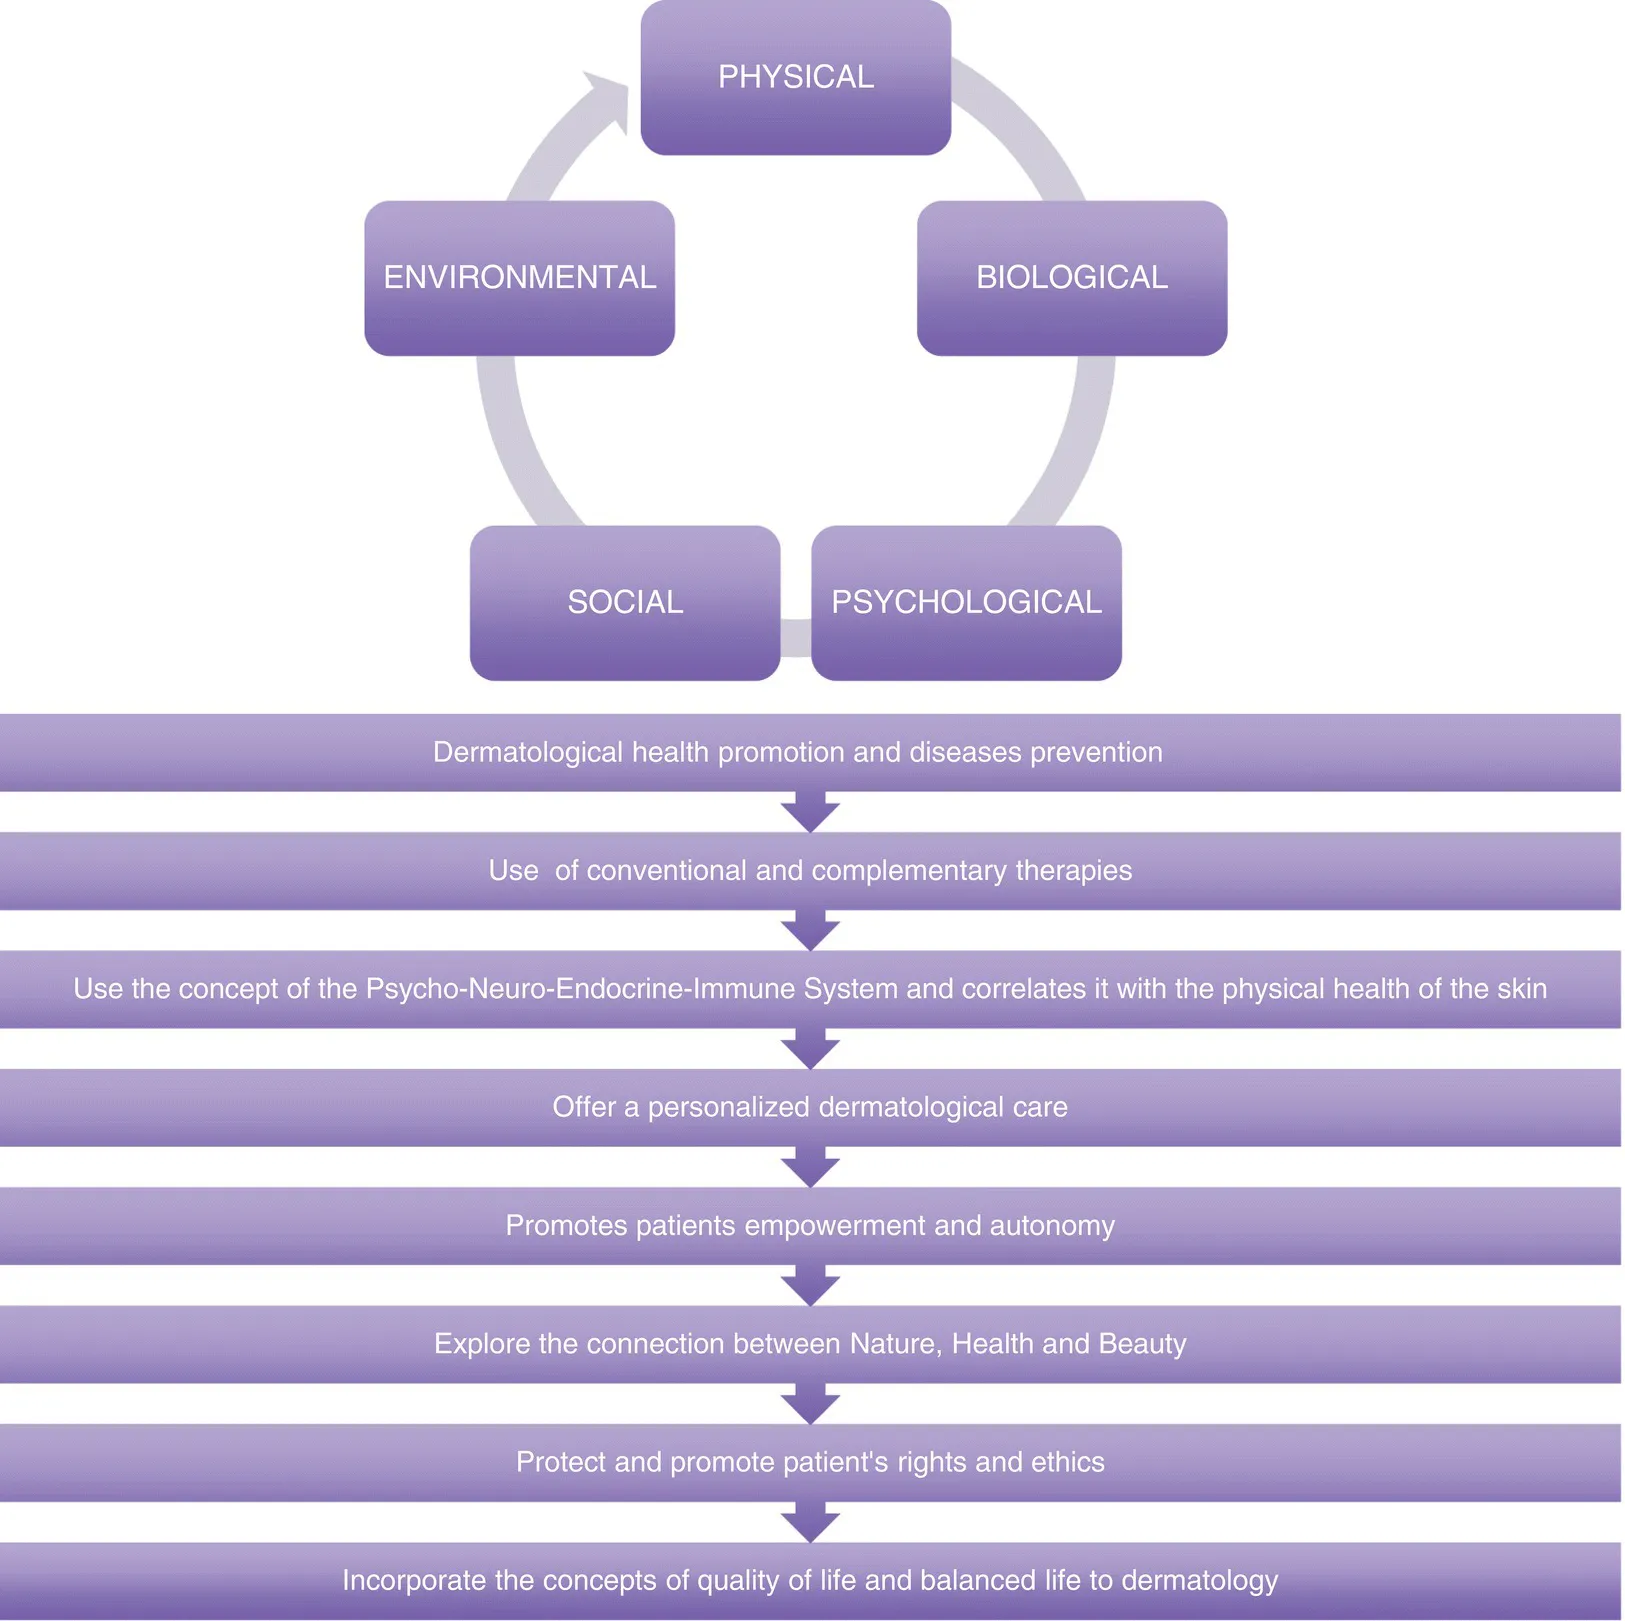 Top: continuous cycle from physical to biological to psychological to social to environmental. Bottom: flow from dermatological health promotion and diseases prevention to incorporation of concepts of quality….